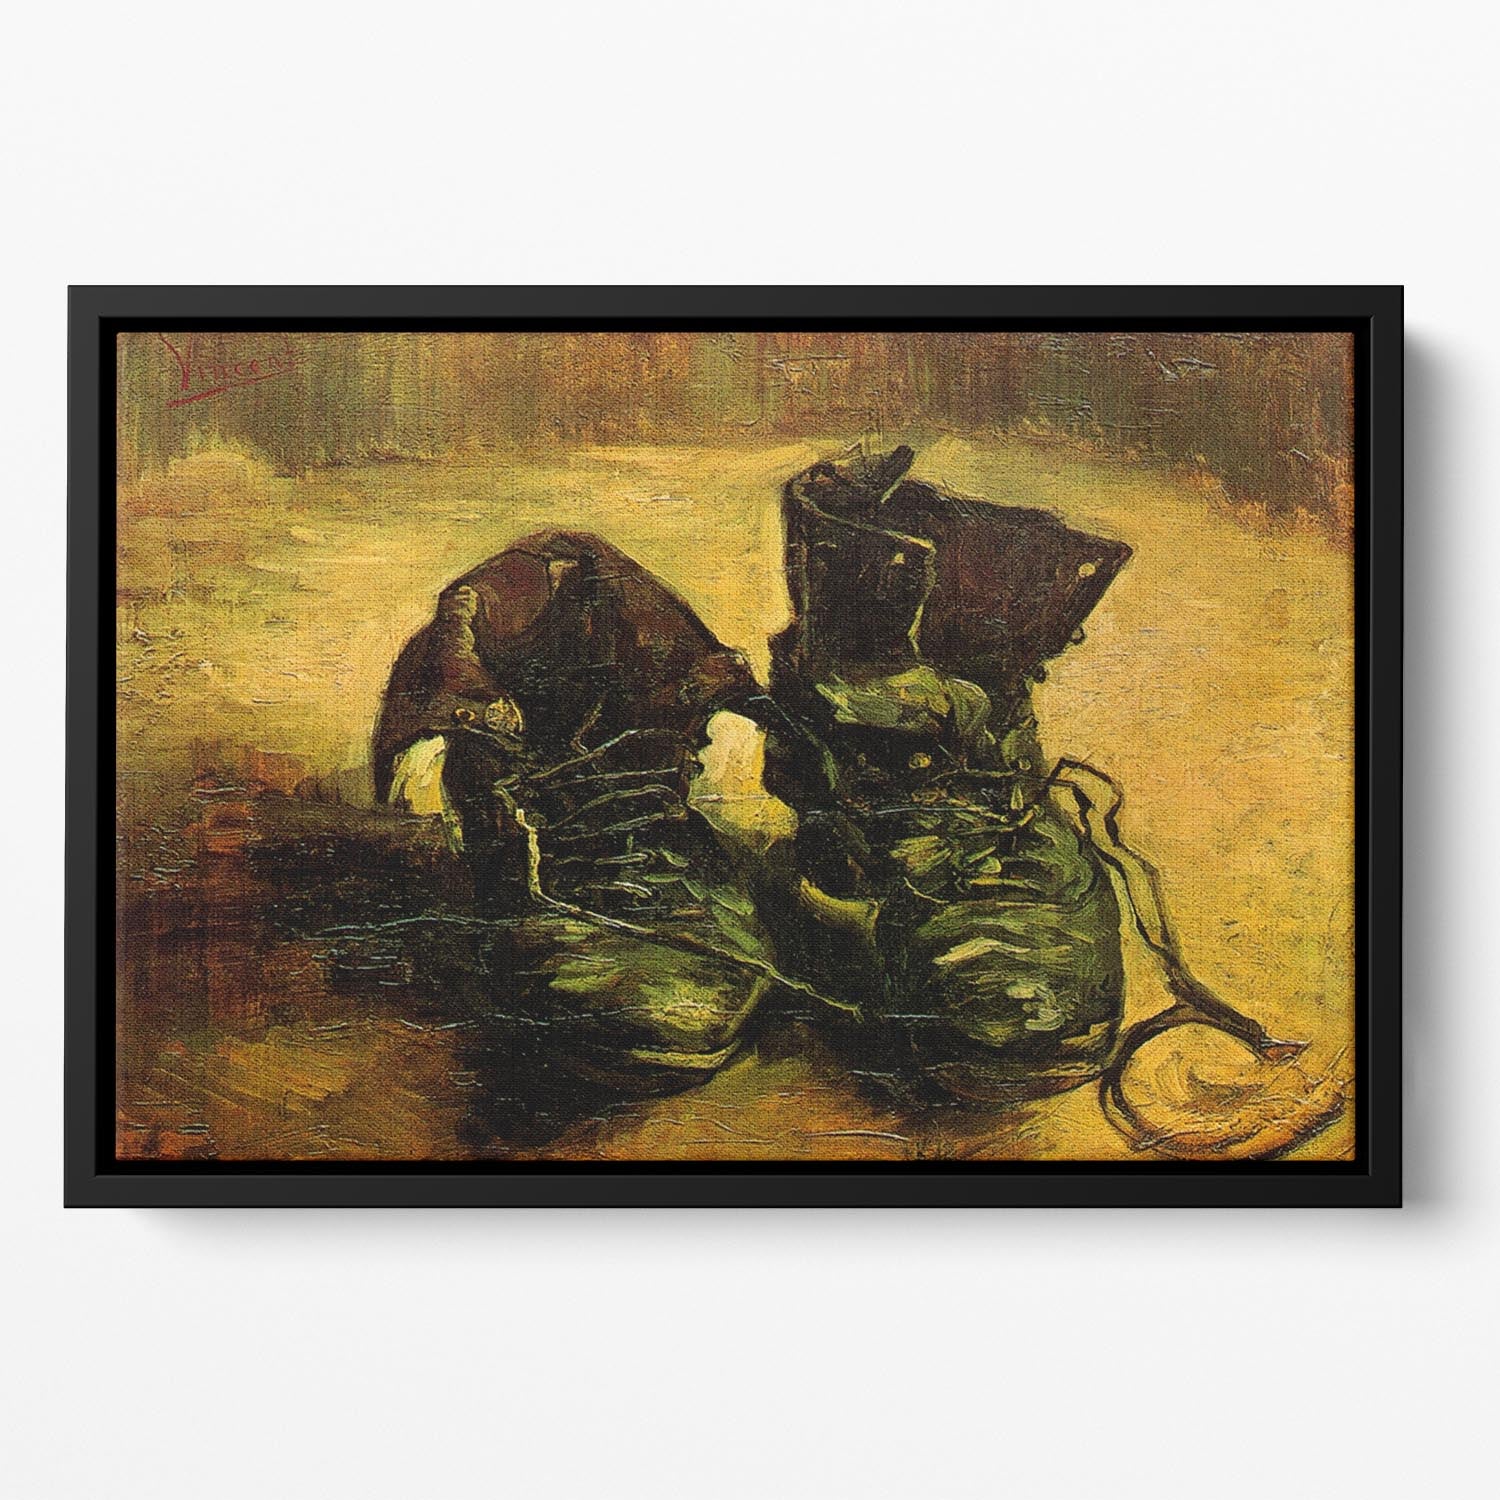 A Pair of Shoes 2 by Van Gogh Floating Framed Canvas